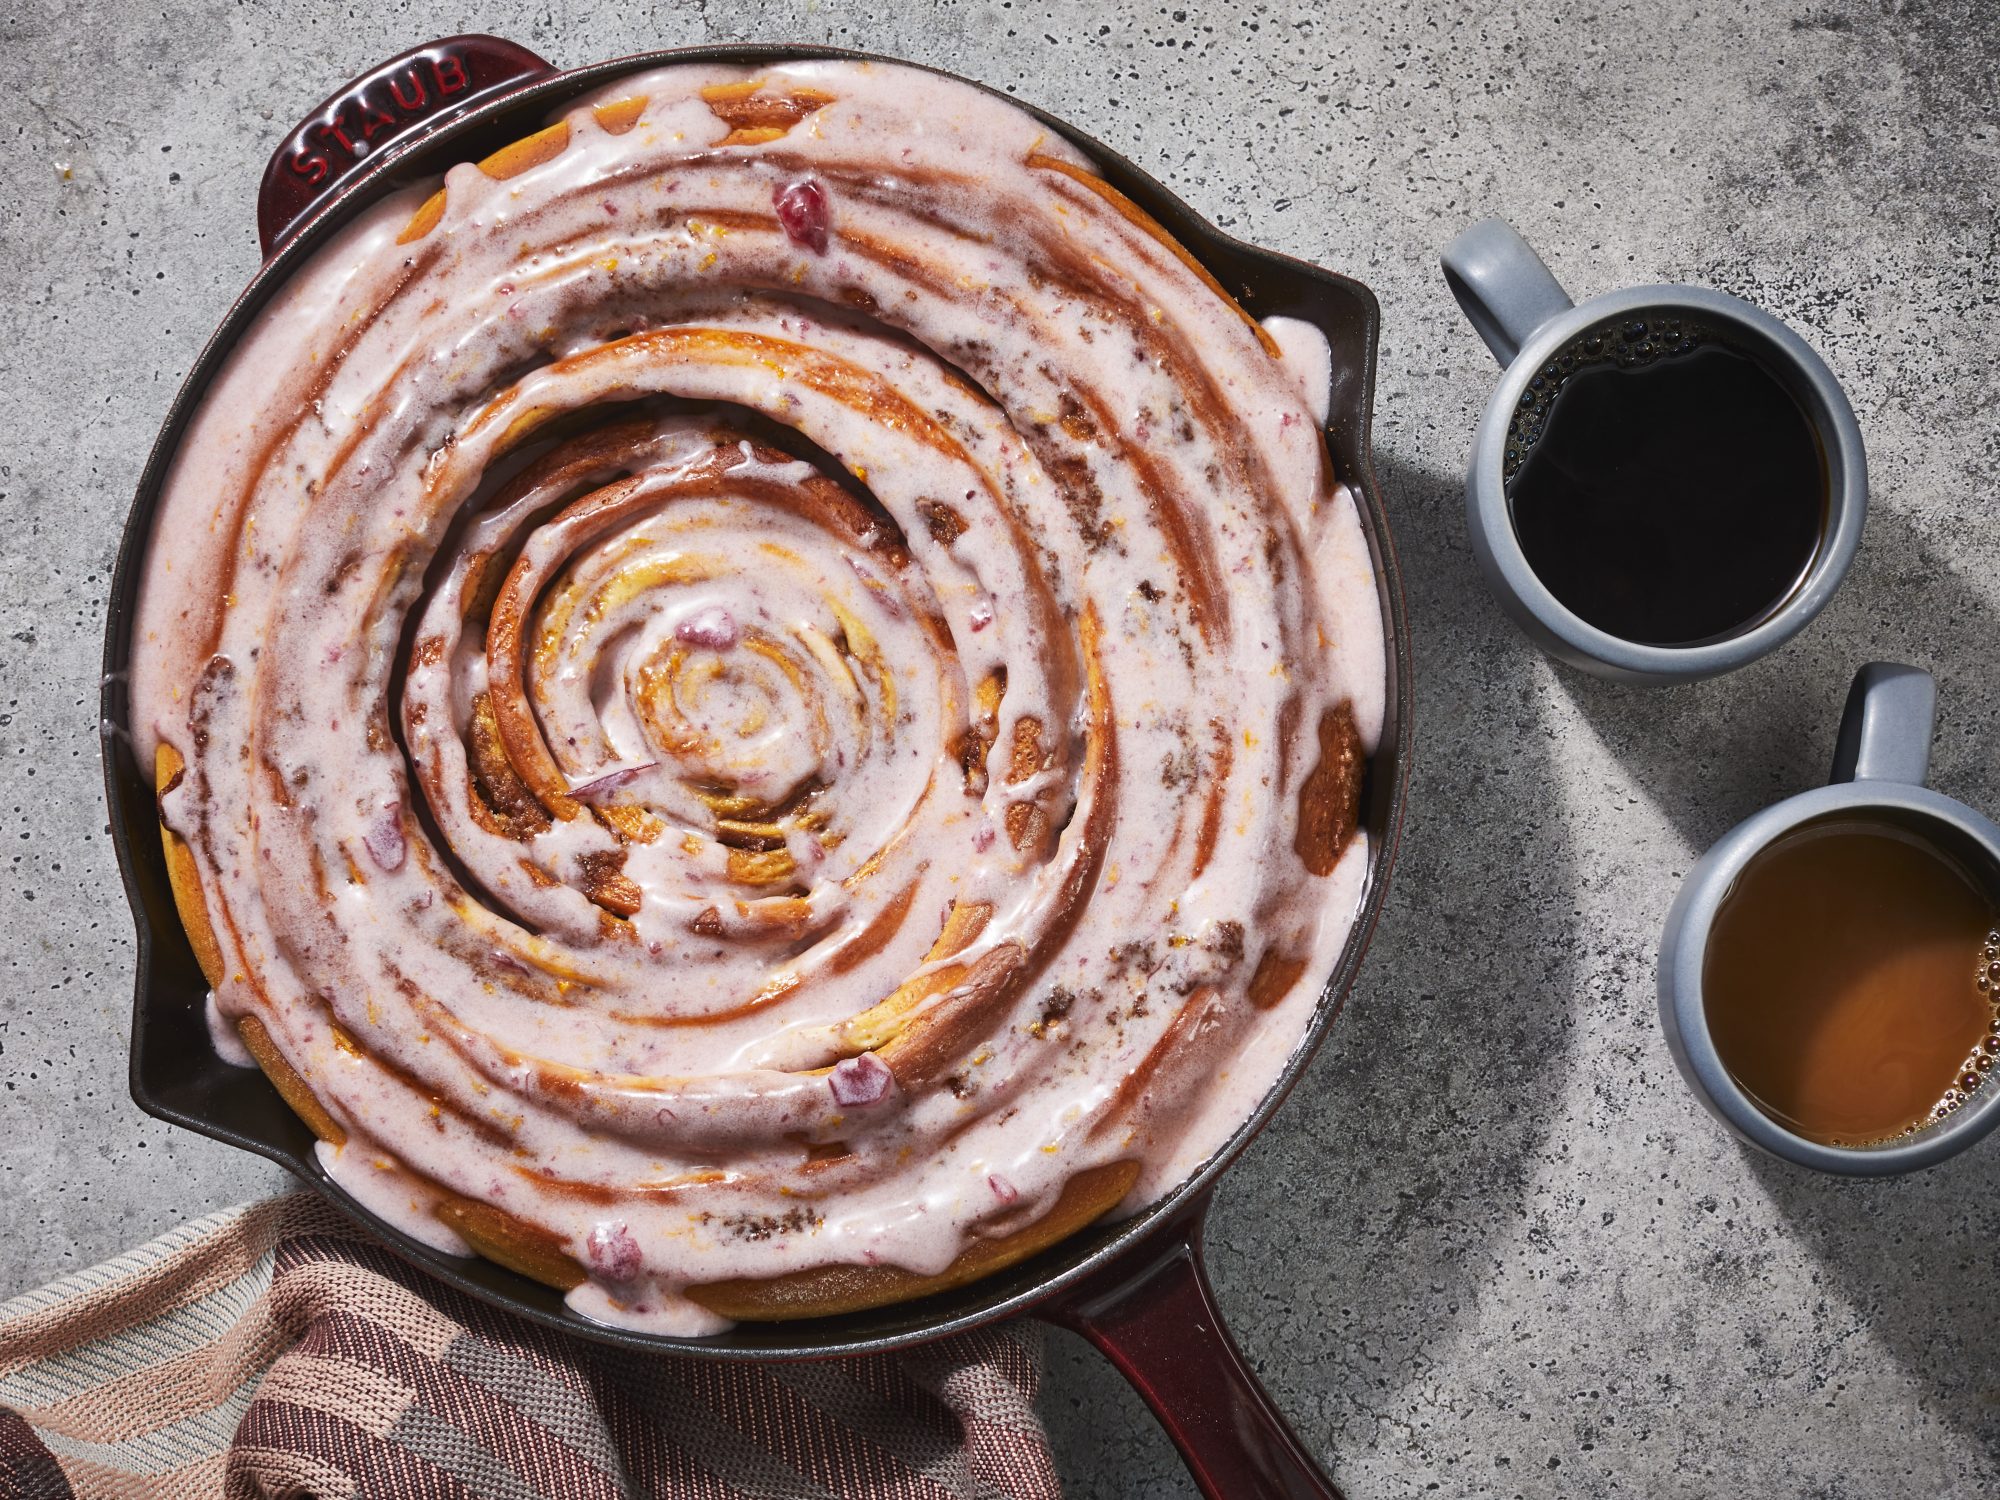 mr - Skillet Cinnamon Roll With Cranberry Glaze Image